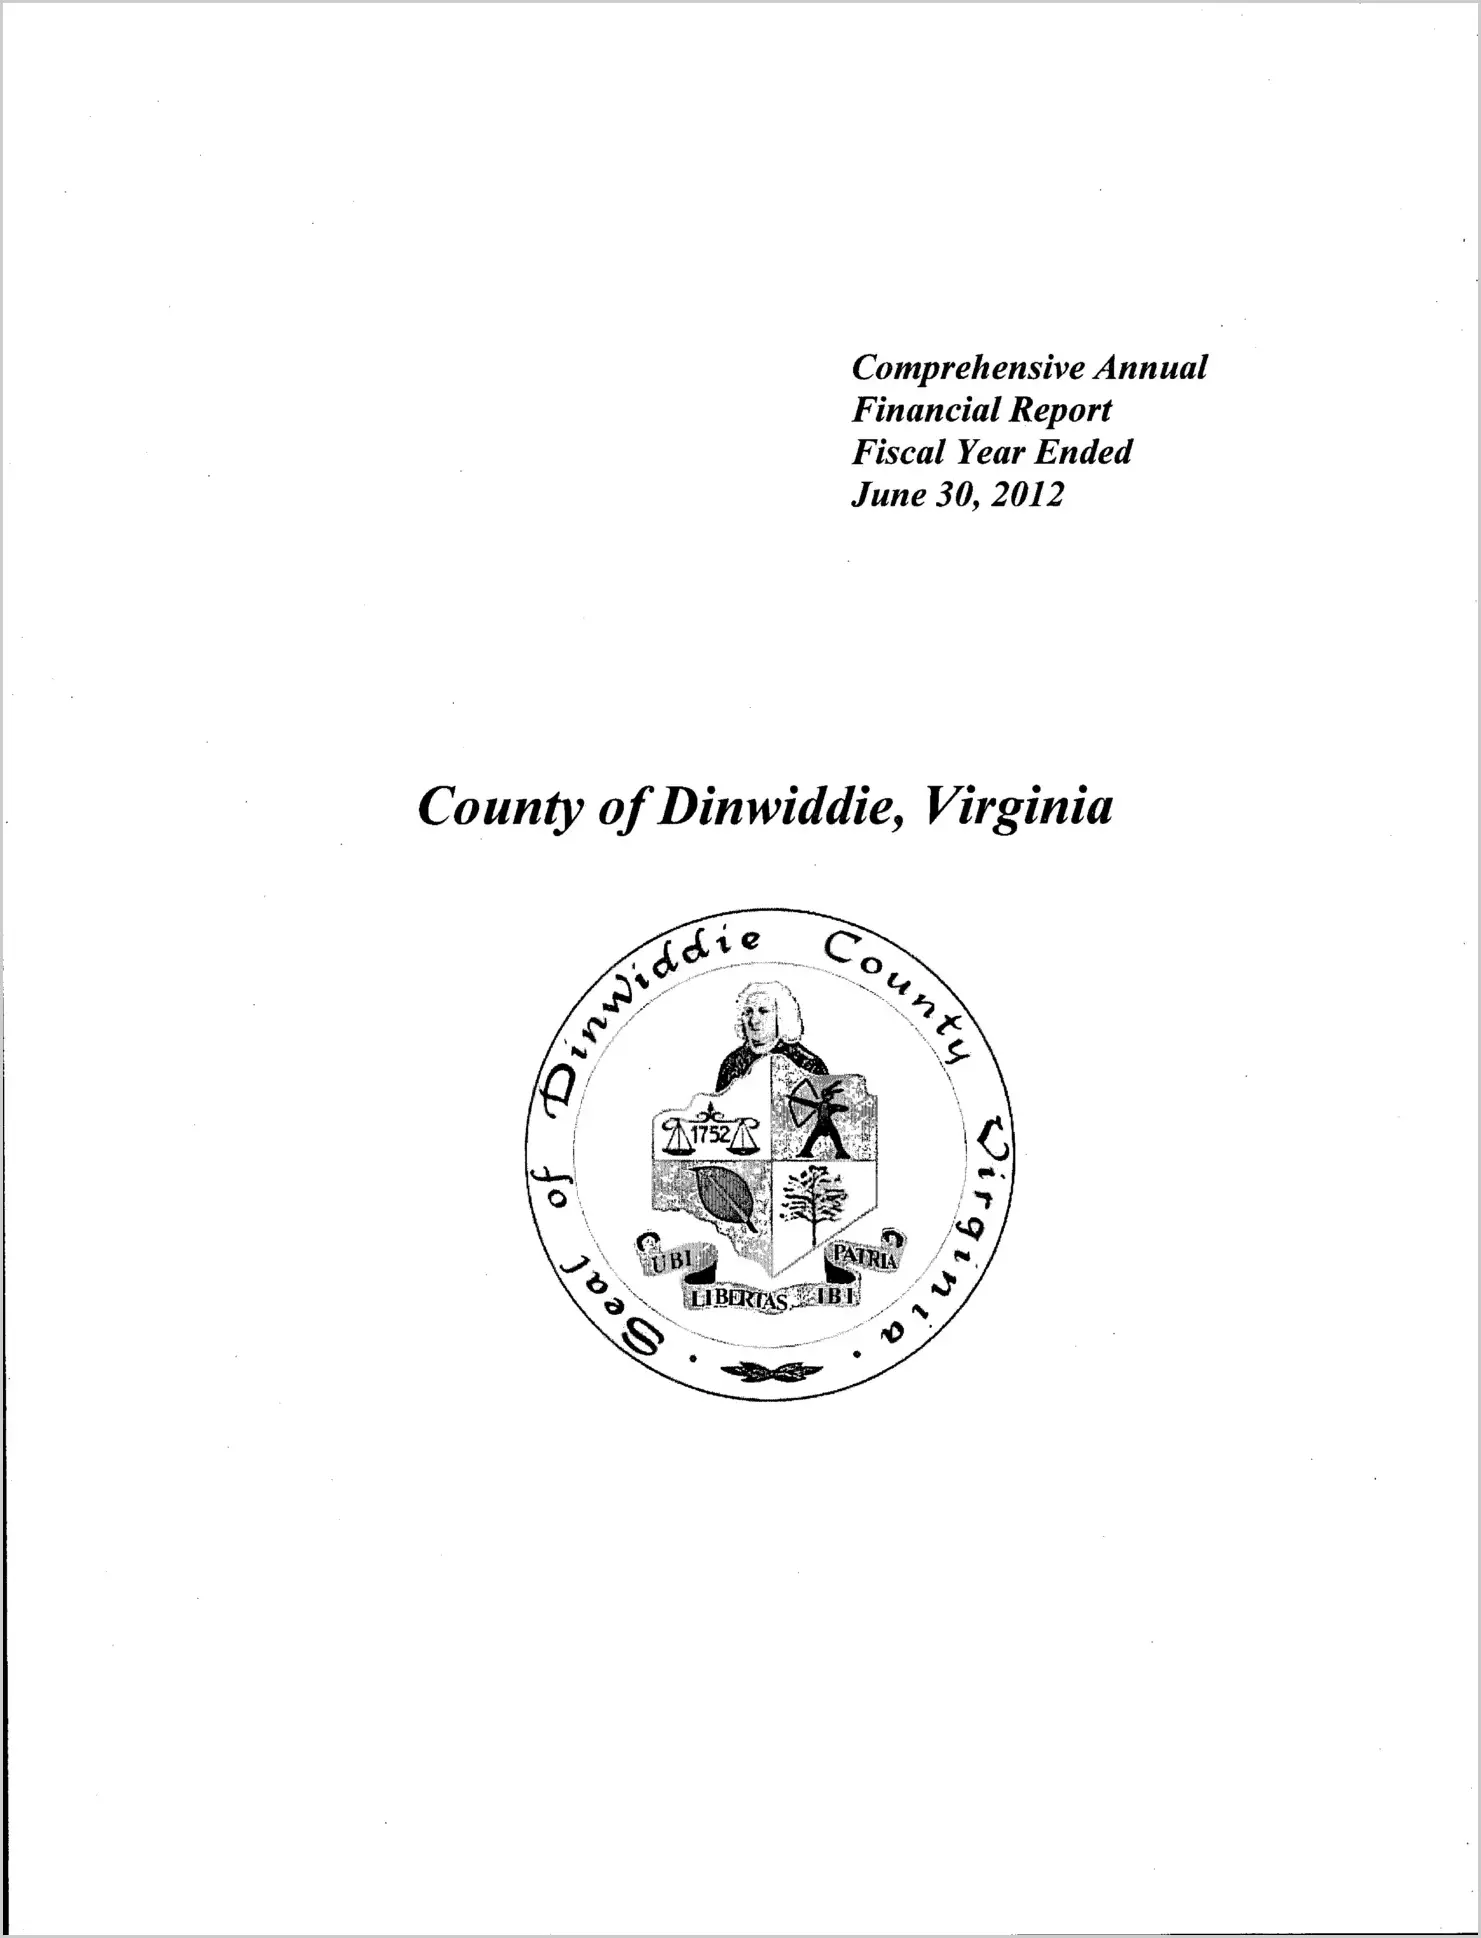 2012 Annual Financial Report for County of Dinwiddie